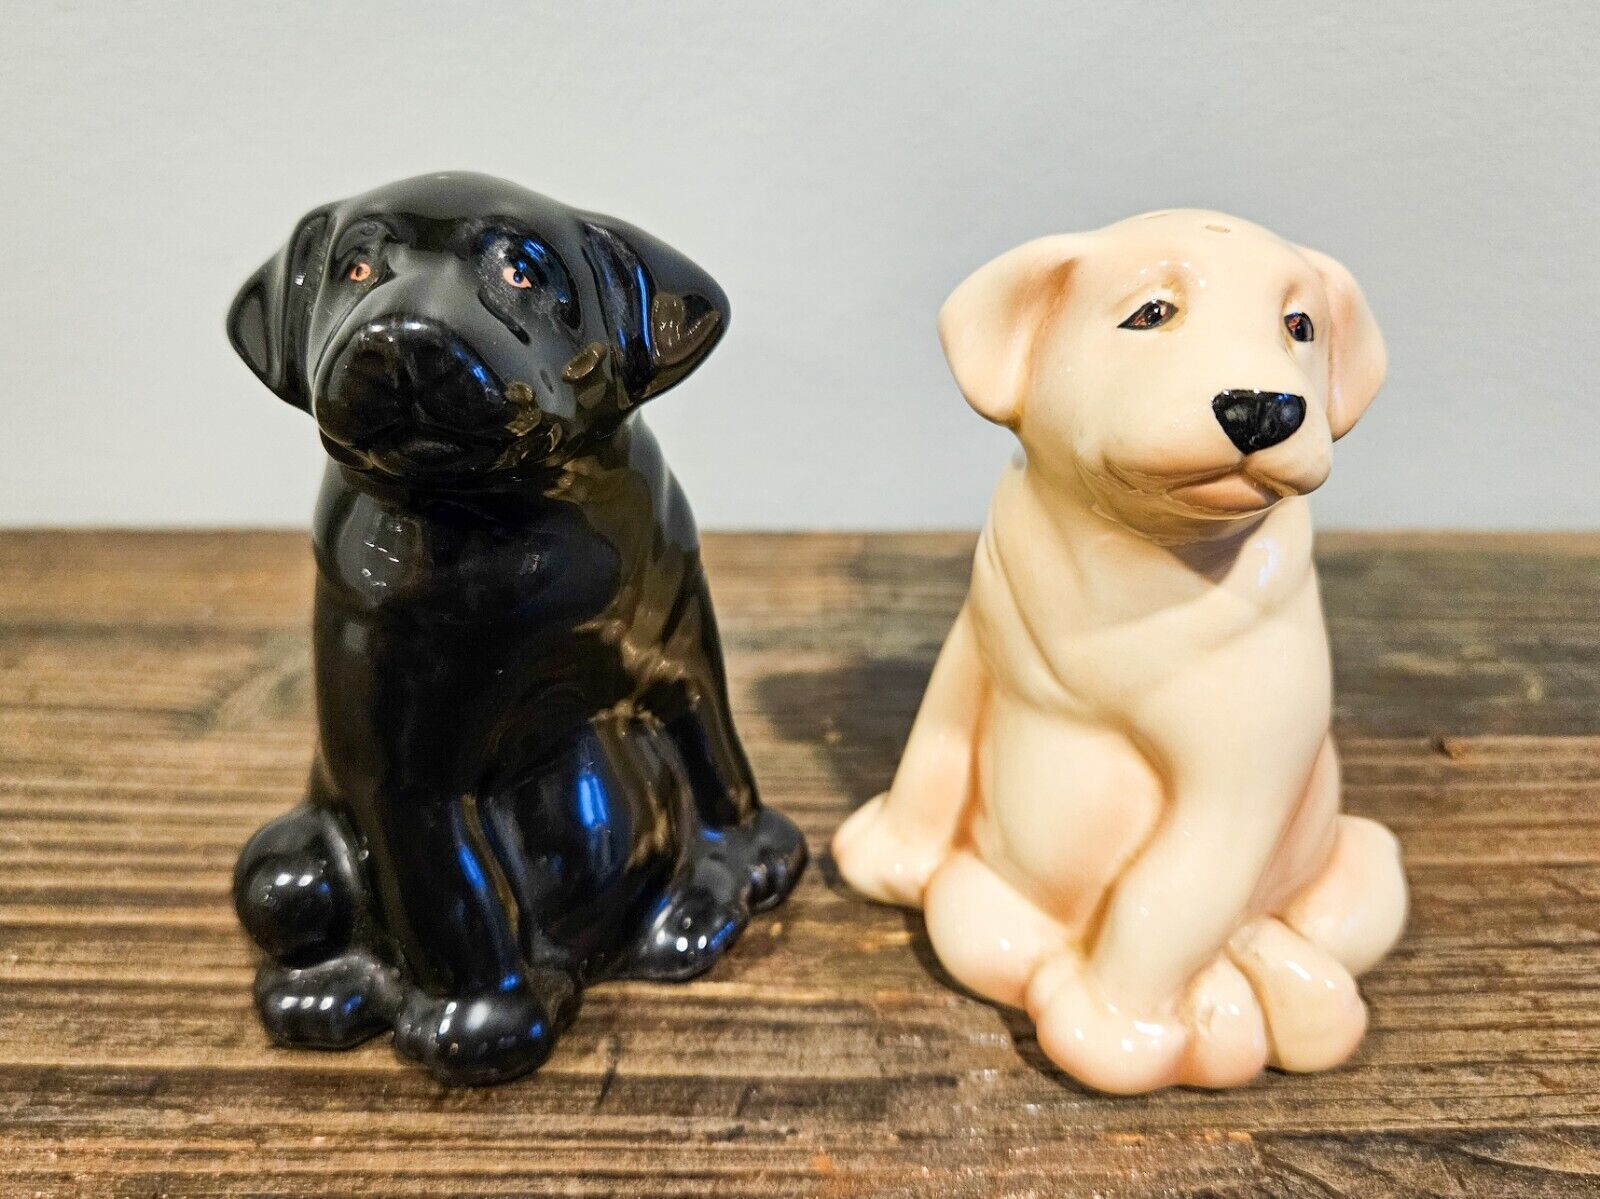 Vintage Ceramic Hand Painted Black and Yellow Labrador Puppy Salt and Pepper...